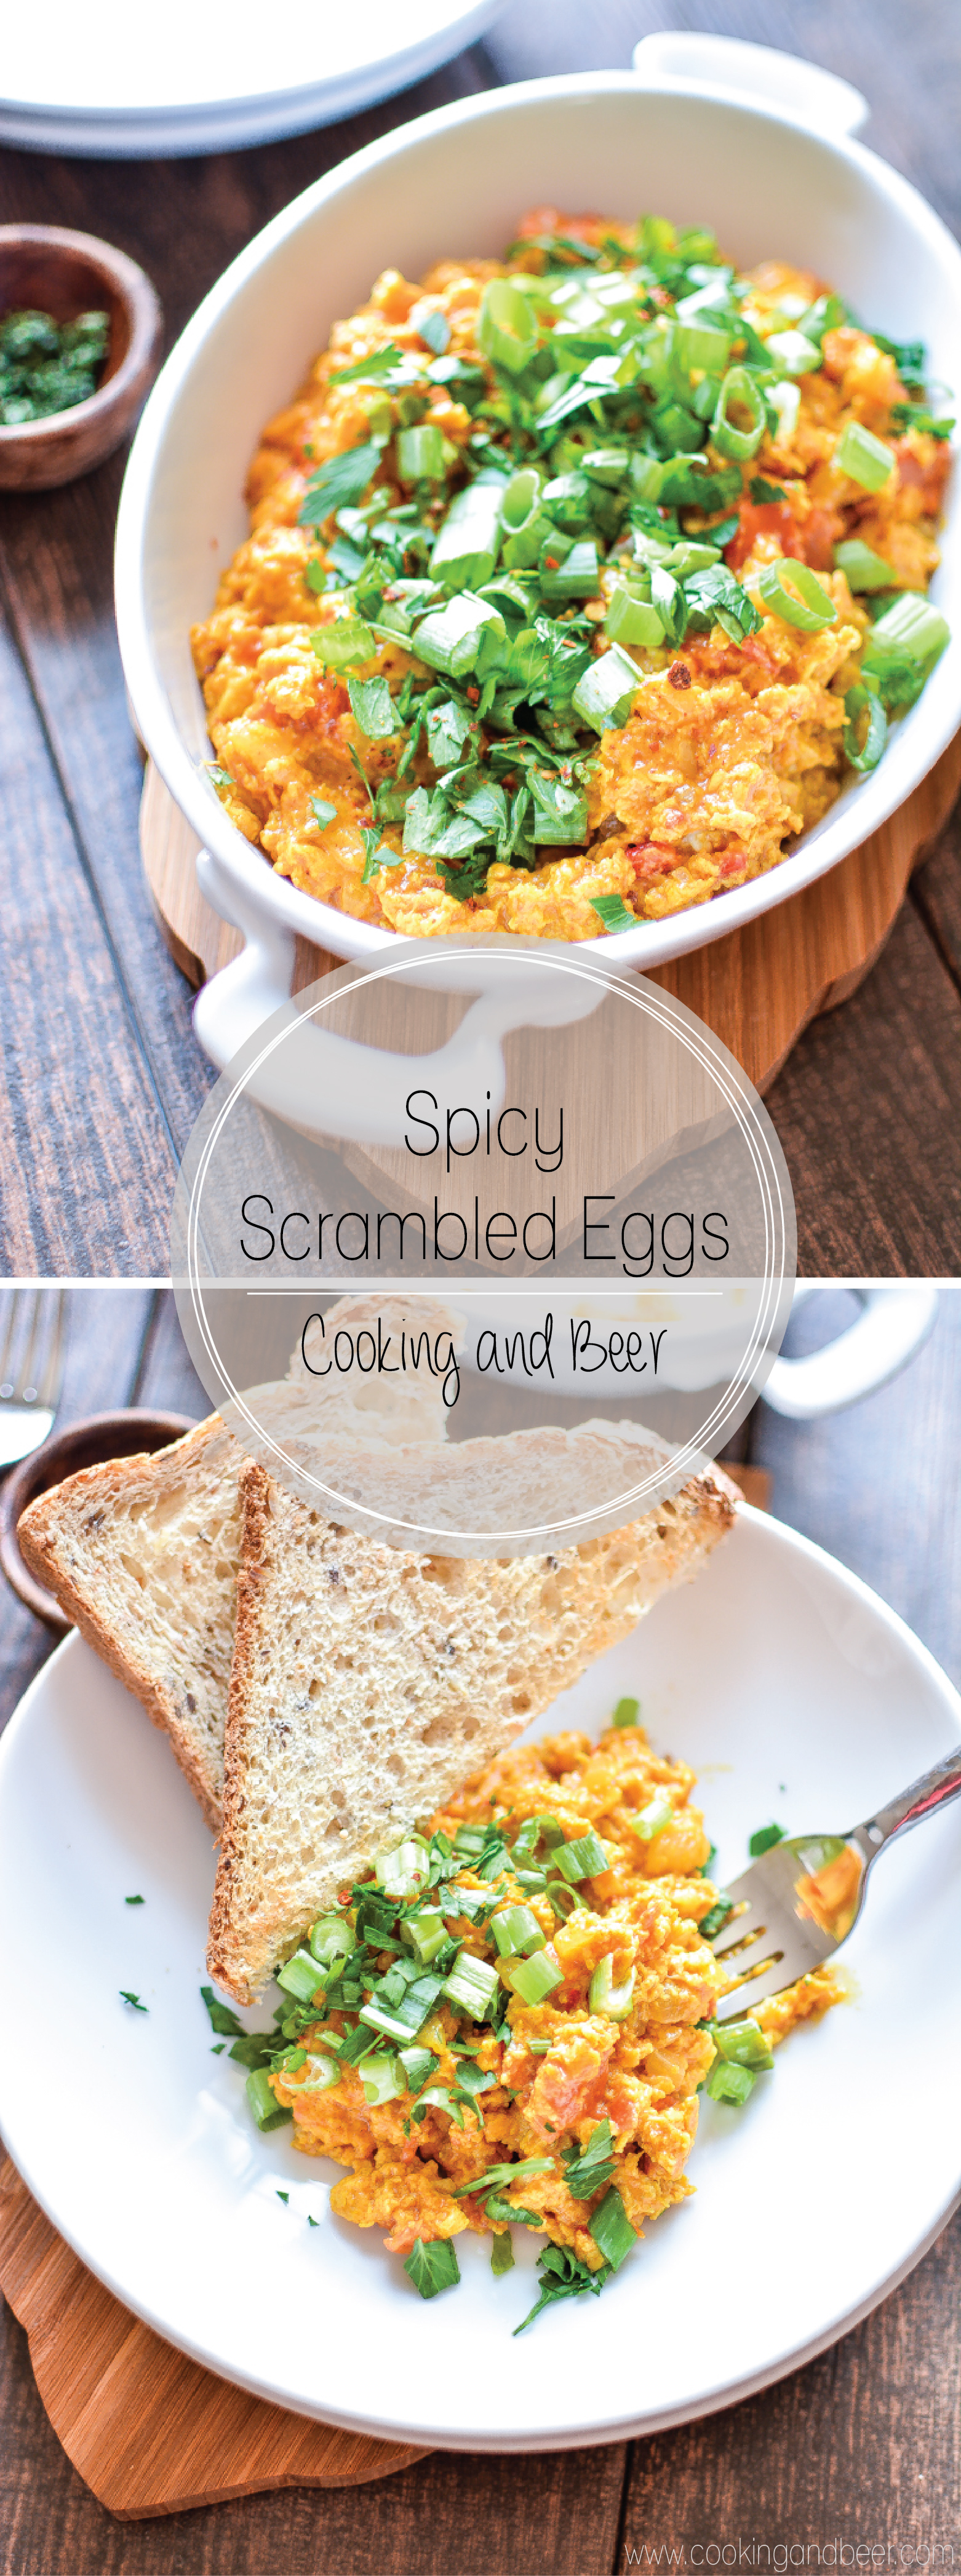 Spicy Scrambled Eggs are a great way to spice up that everyday scrambled eggs recipe! | www.cookingandbeer.com